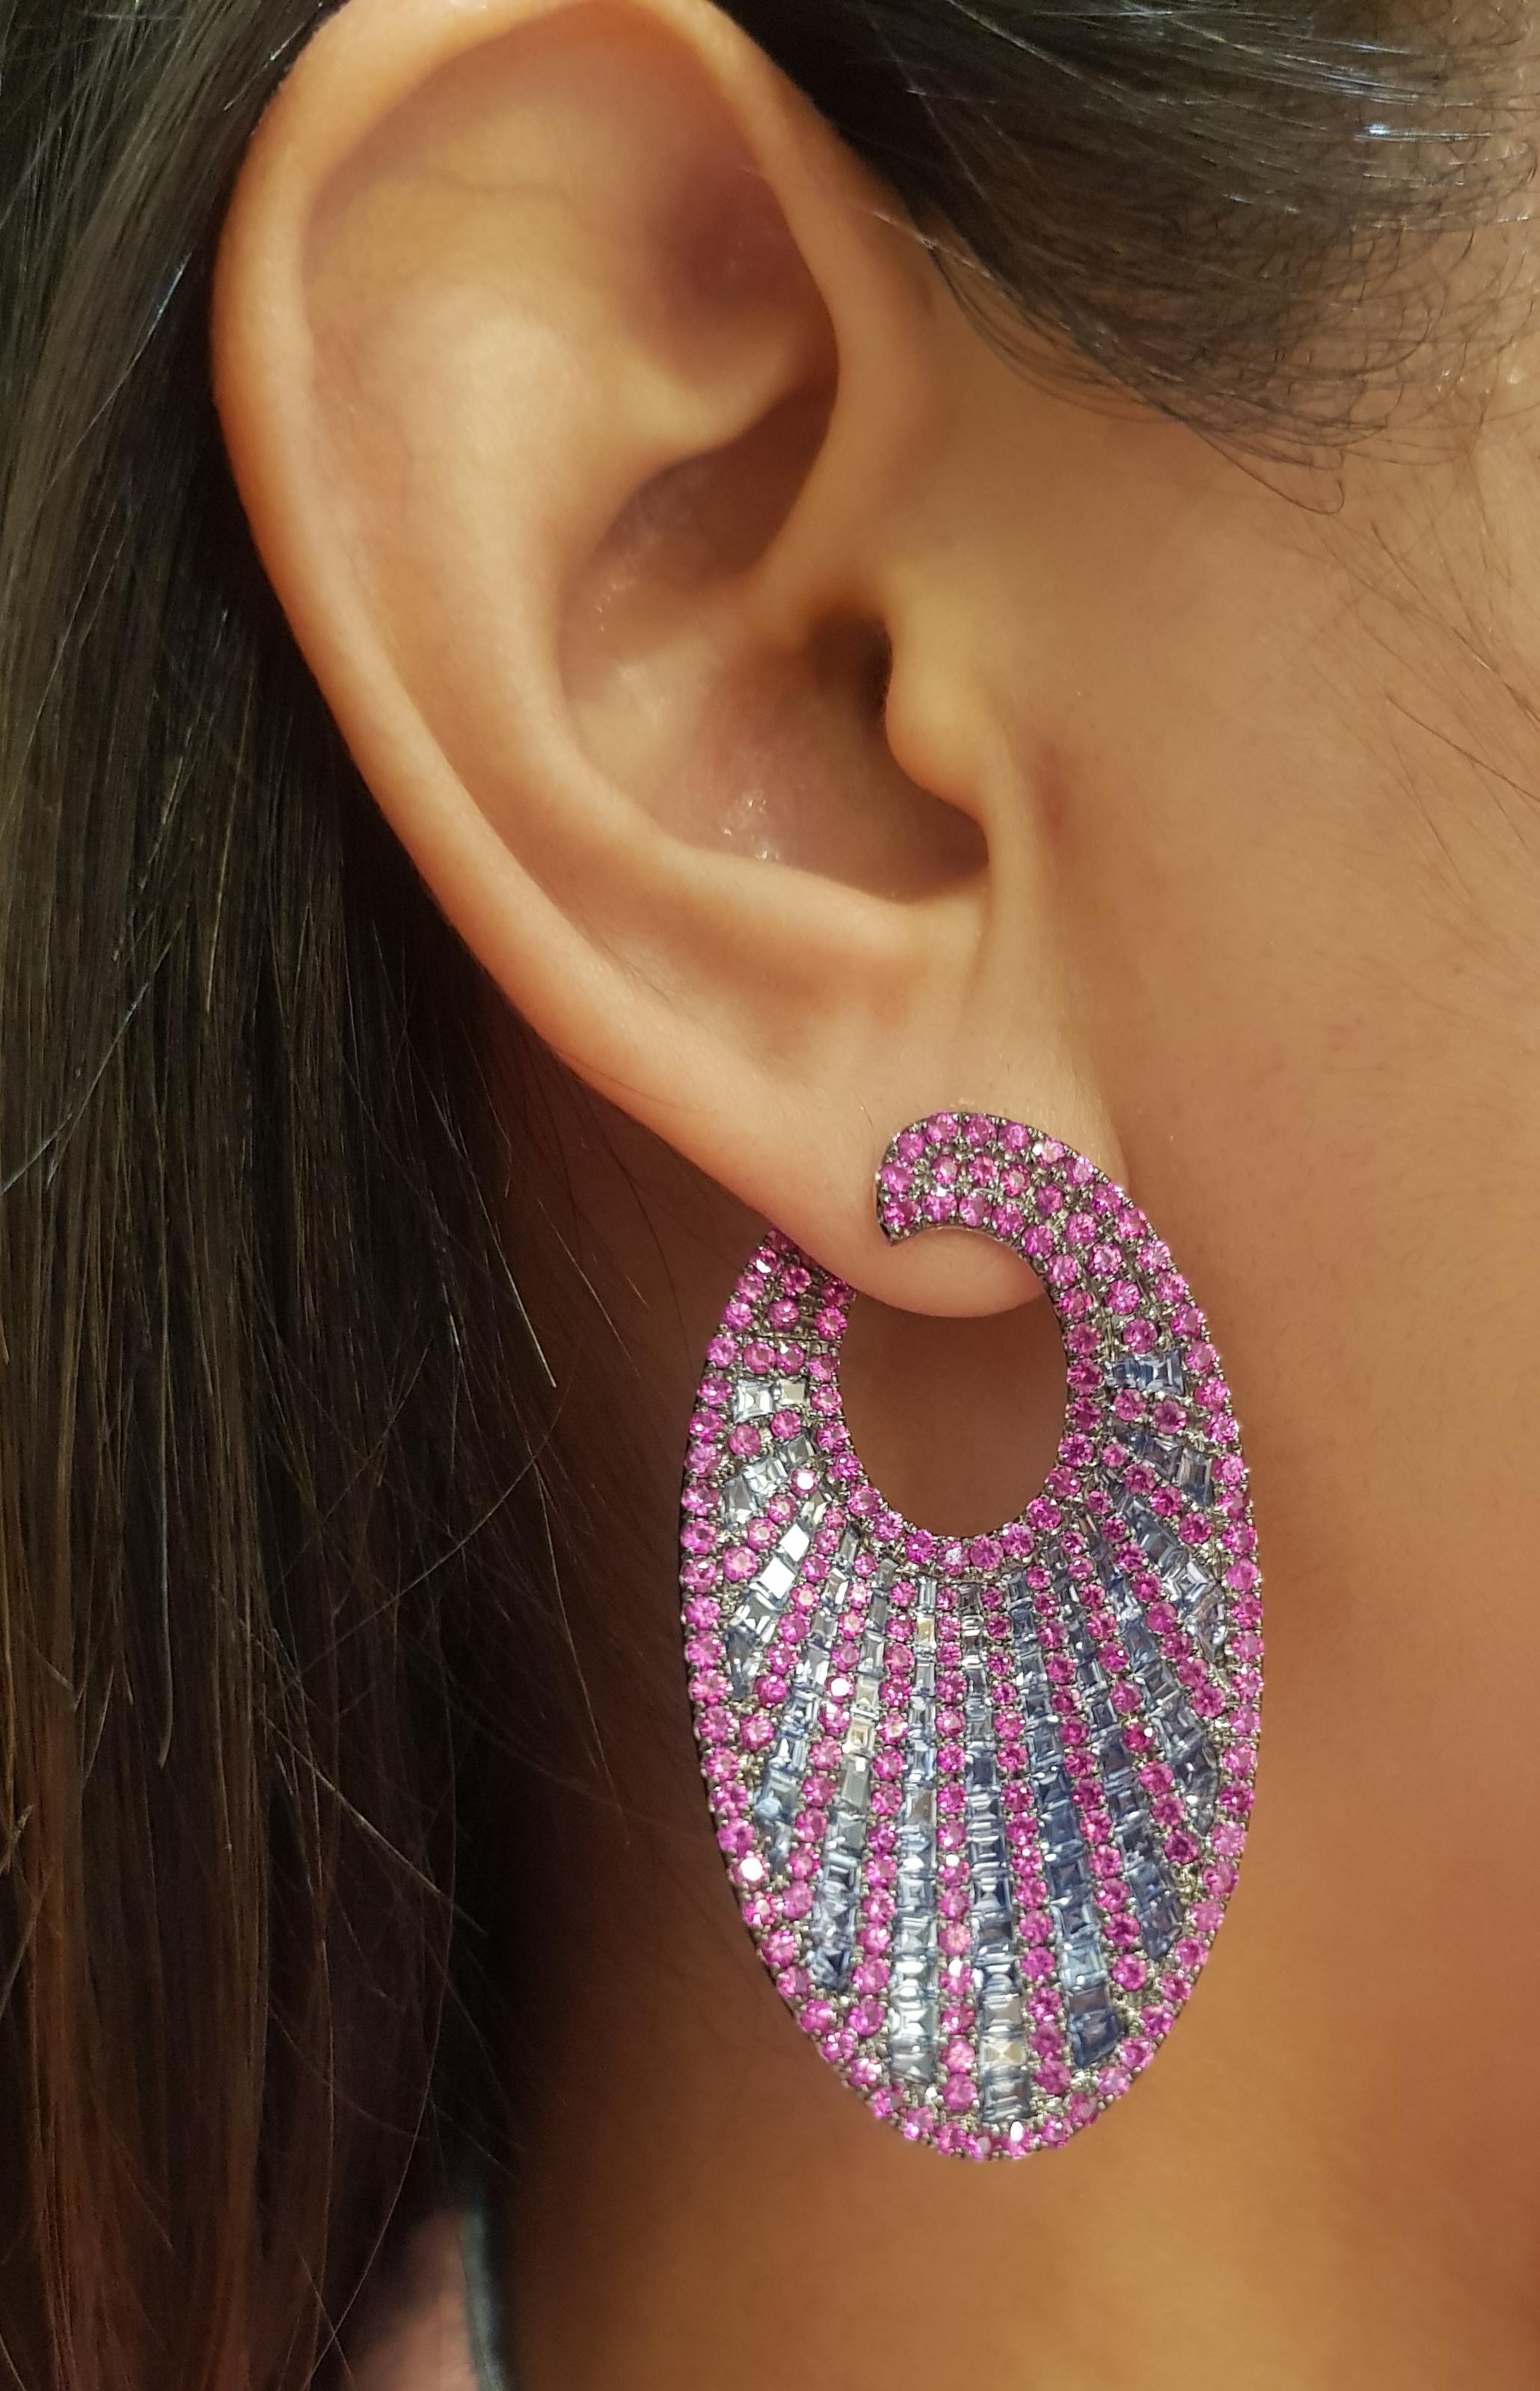 Pink Sapphire 7.22 carats and Blue Sapphire 19.97 carats Earrings set in 14K White Gold Settings

Width: 2.8 cm 
Length: 5.0 cm
Total Weight: 25.2 grams

